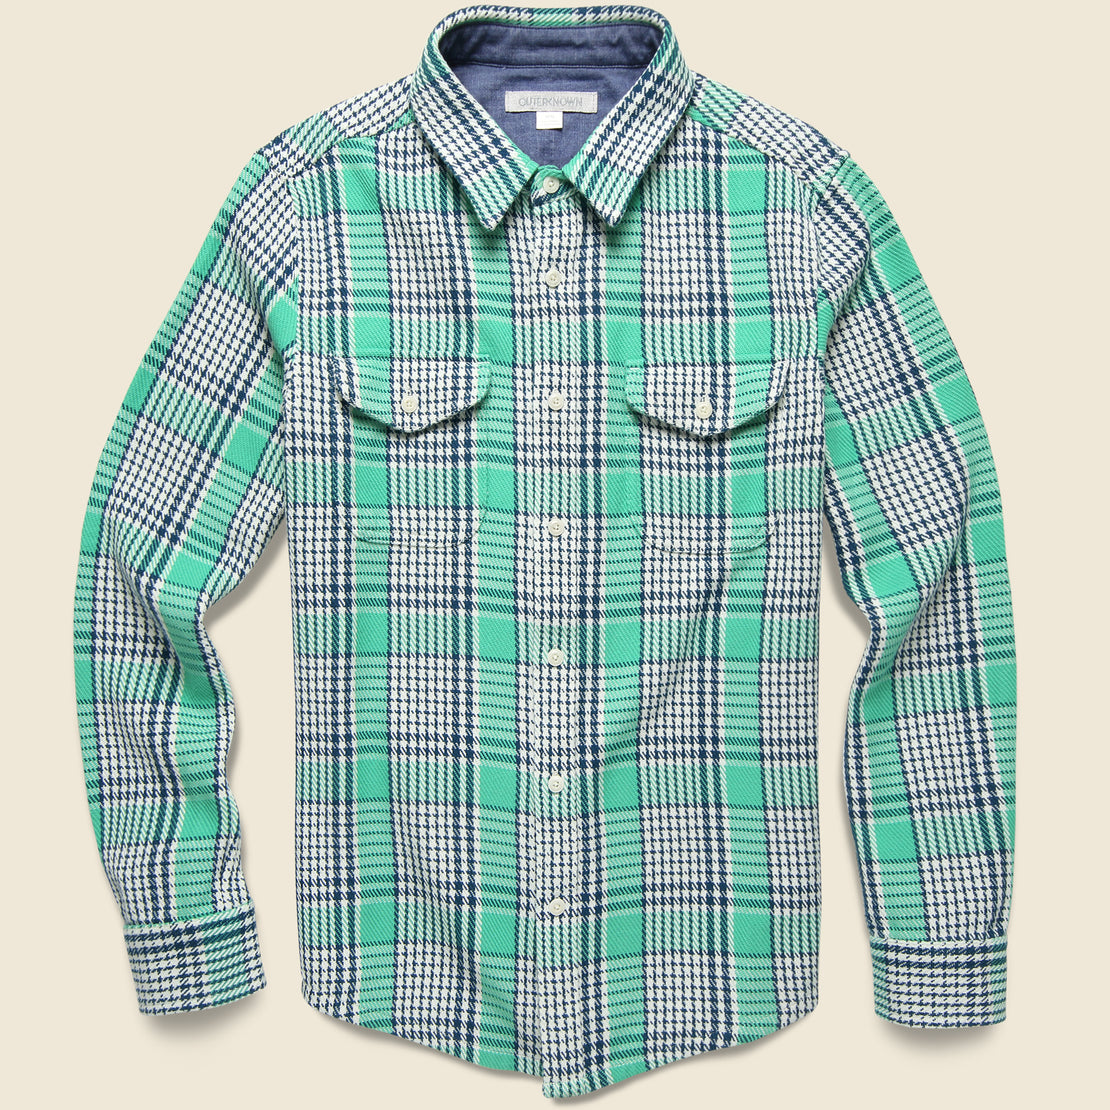 Outerknown Blanket Shirt - Sea Green Graph Plaid